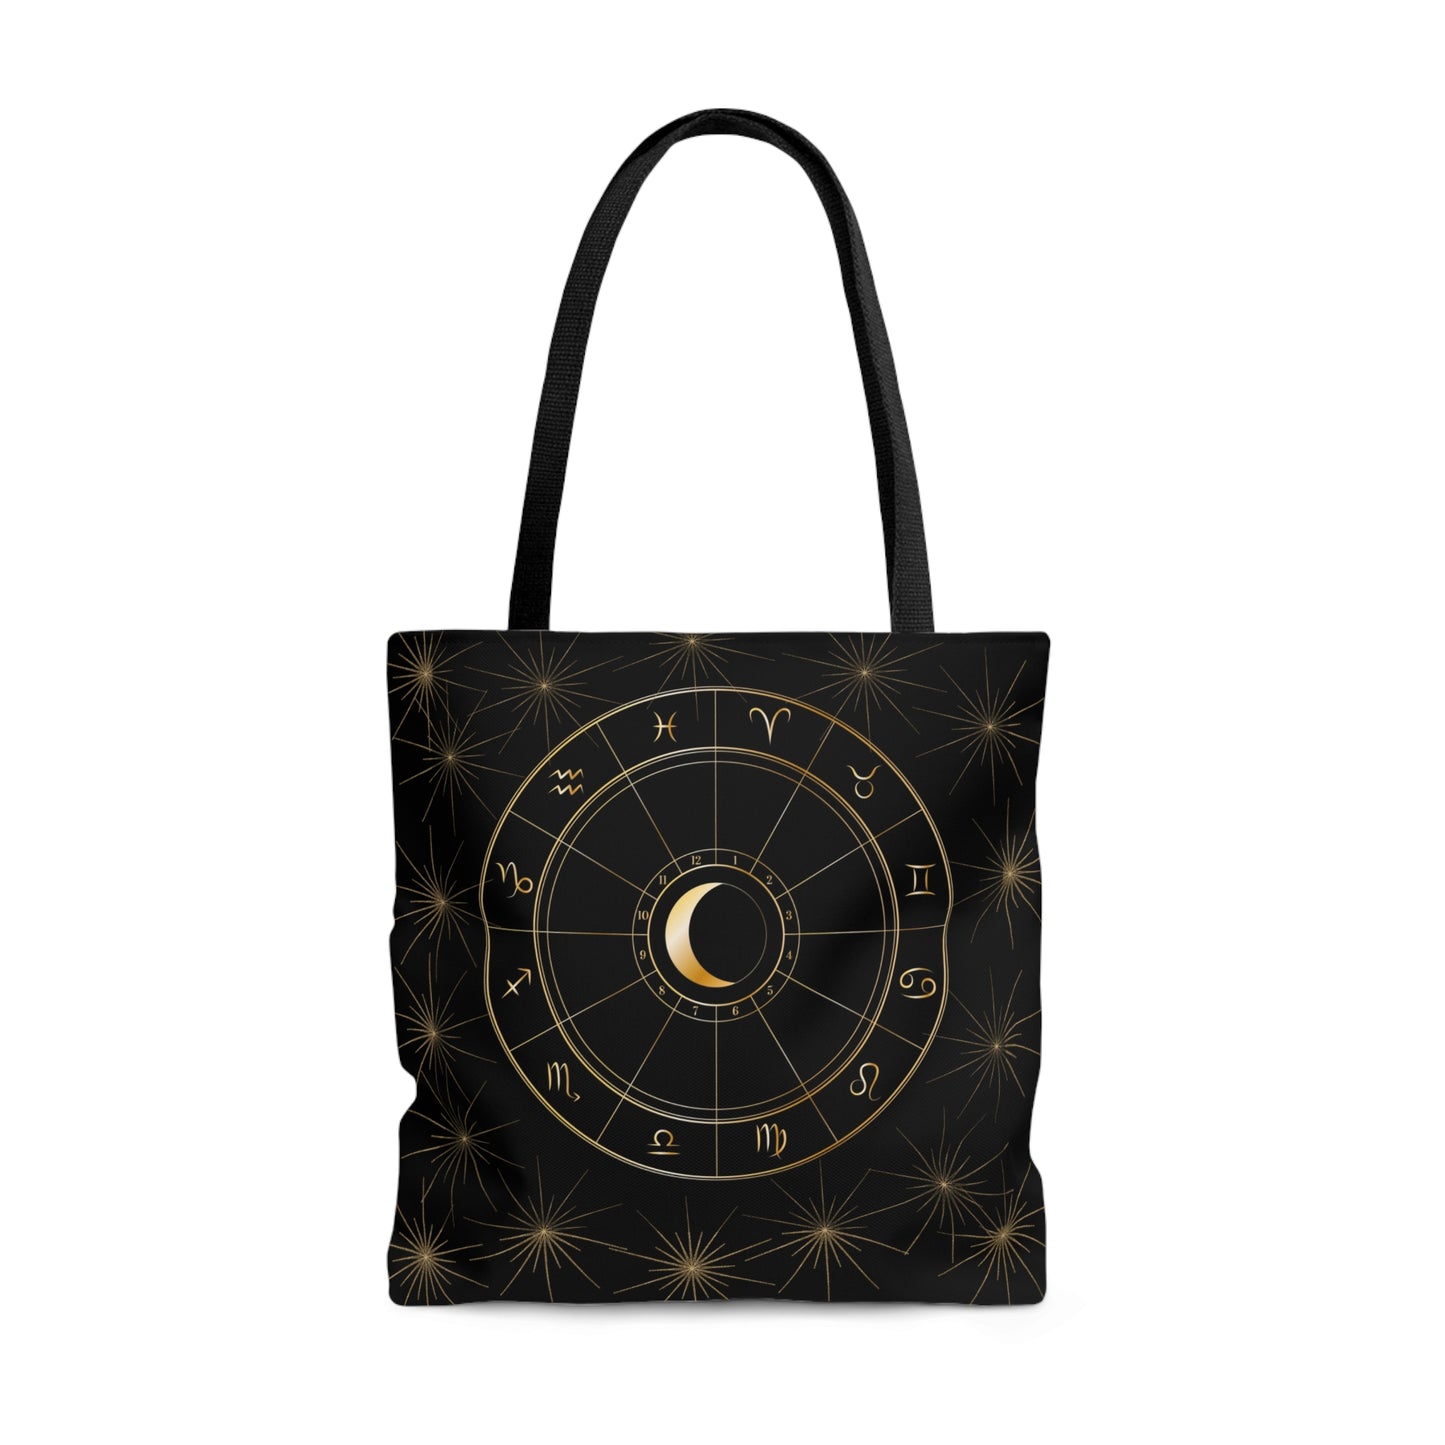 Celestial Sun Moon and Astrology Chart Tote Bag